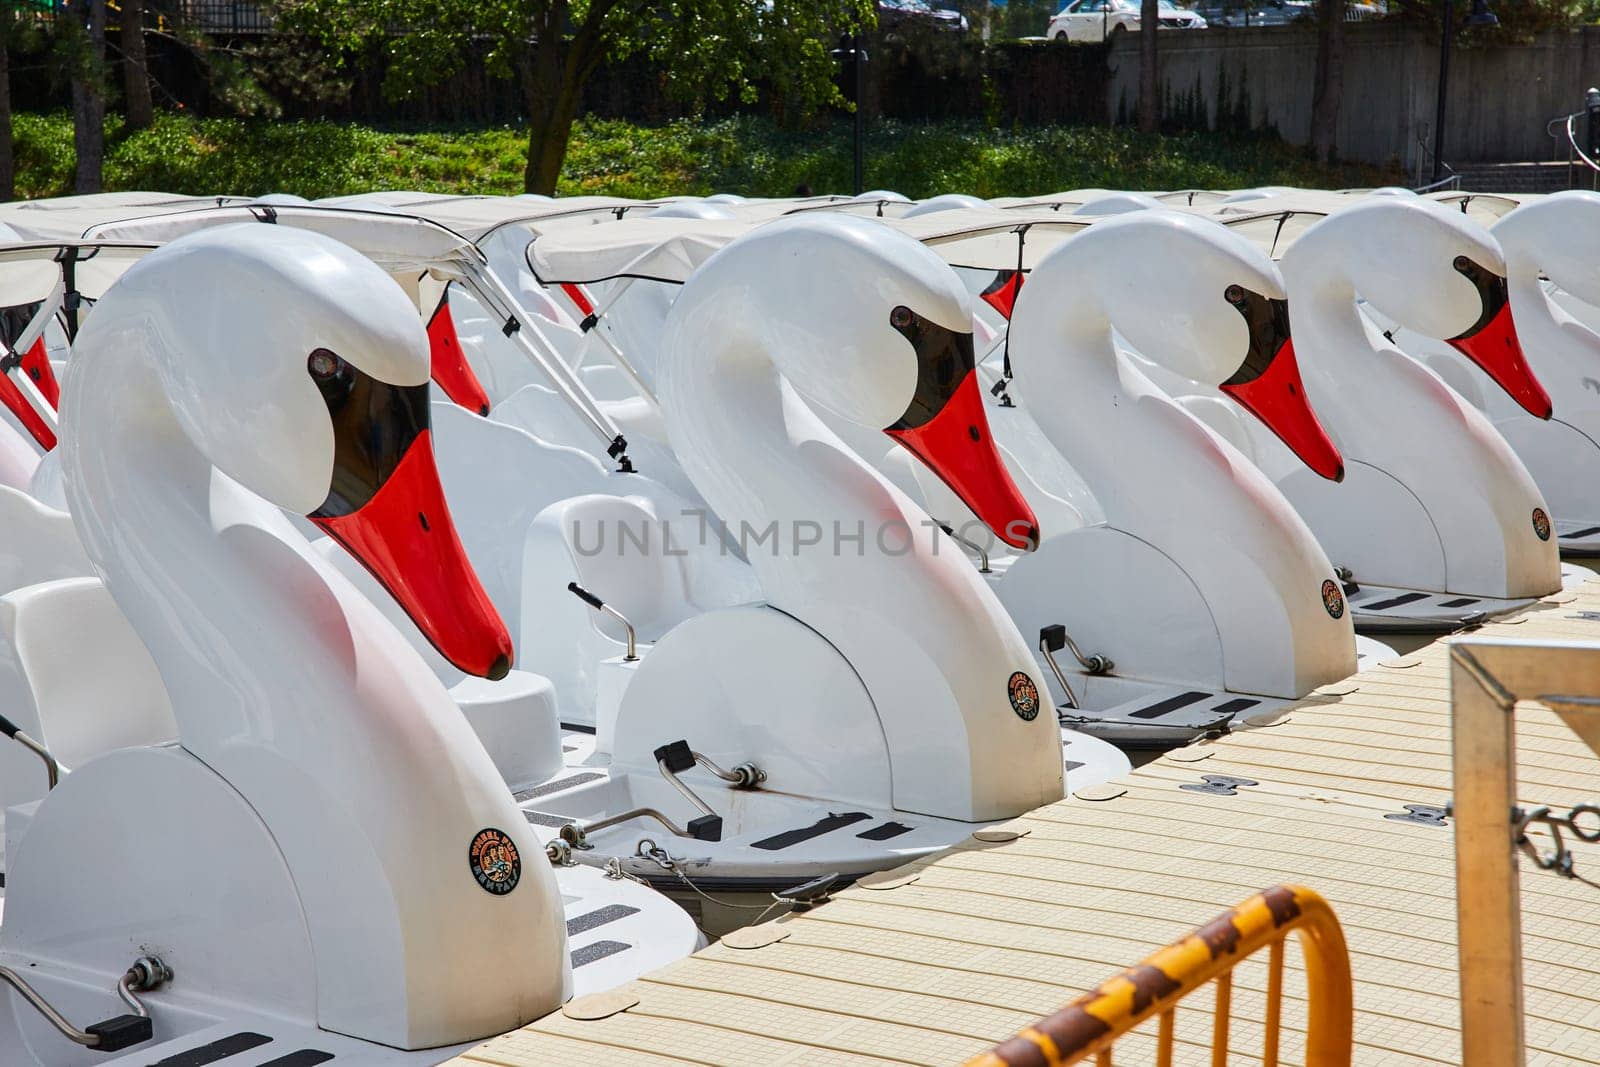 Sunny day in Indianapolis, Indiana with vibrant swan pedal boats lined up for leisure rides on the canal, 2023